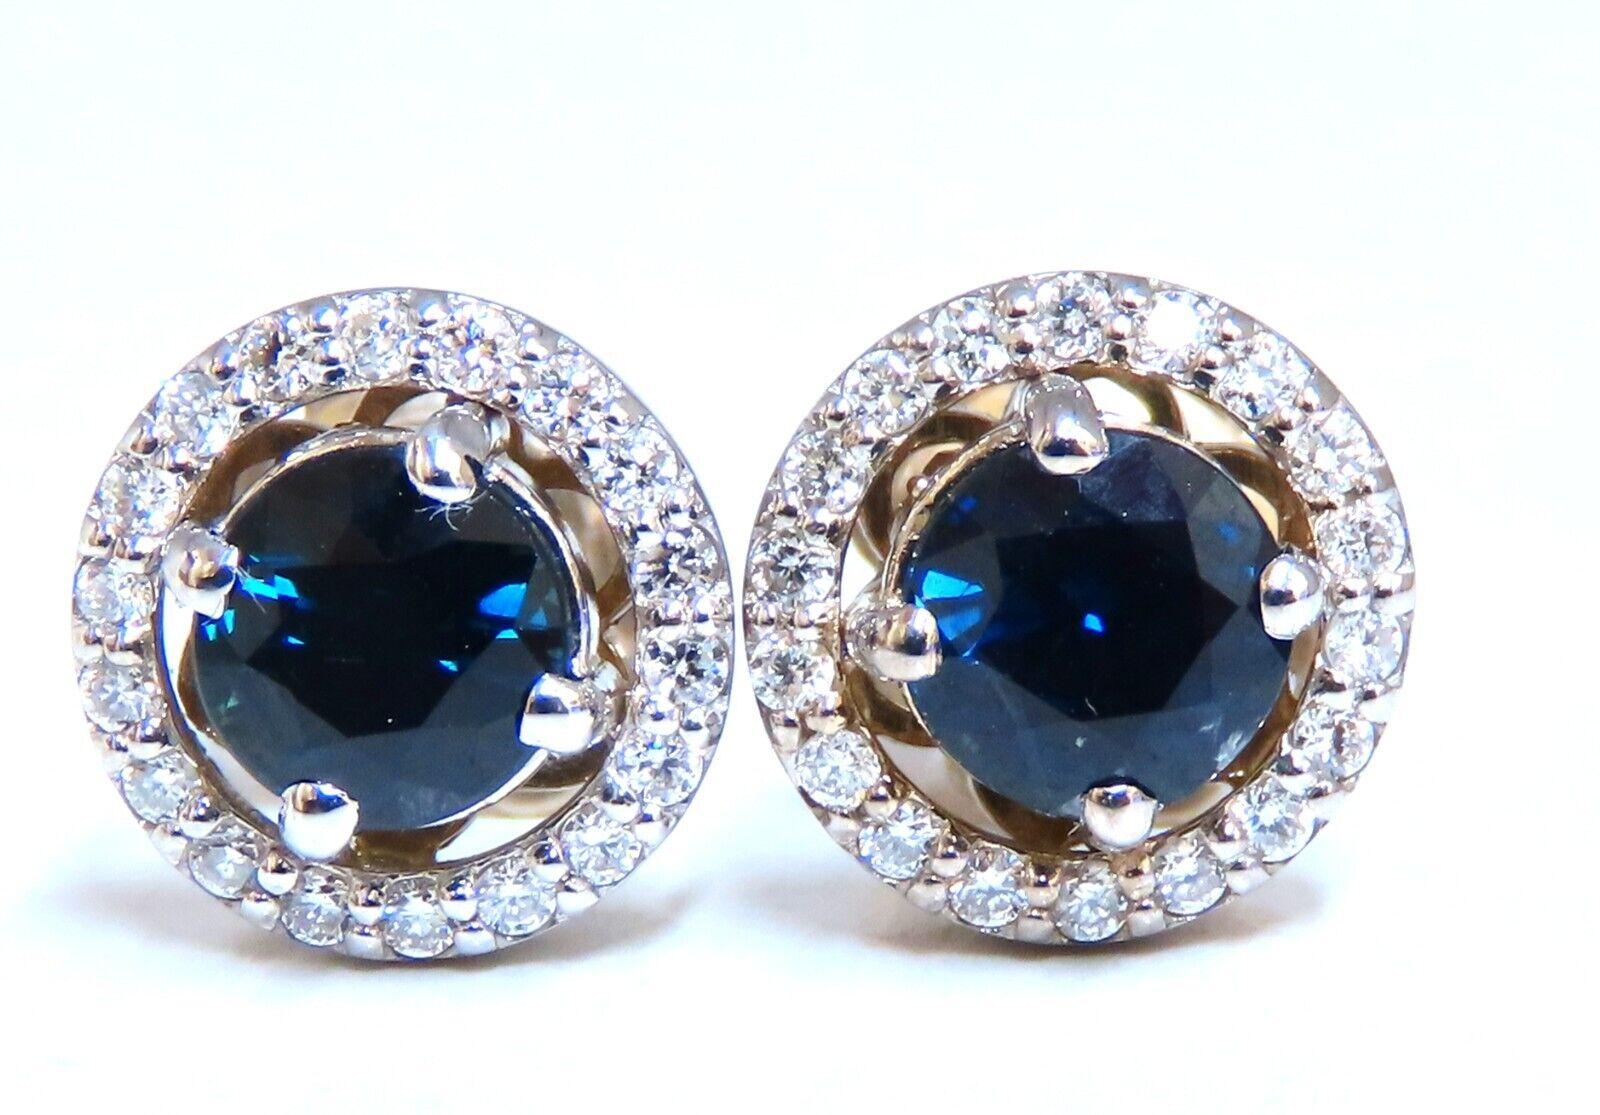 Circular Halo cluster Sapphire earrings.

1.10 carat natural round blue sapphires.

5 mm diameter.

. 40ct. Natural round diamonds

G color vs to clarity

14 karat white gold

Earrings measure 8.8 mm diameter

3.3 g